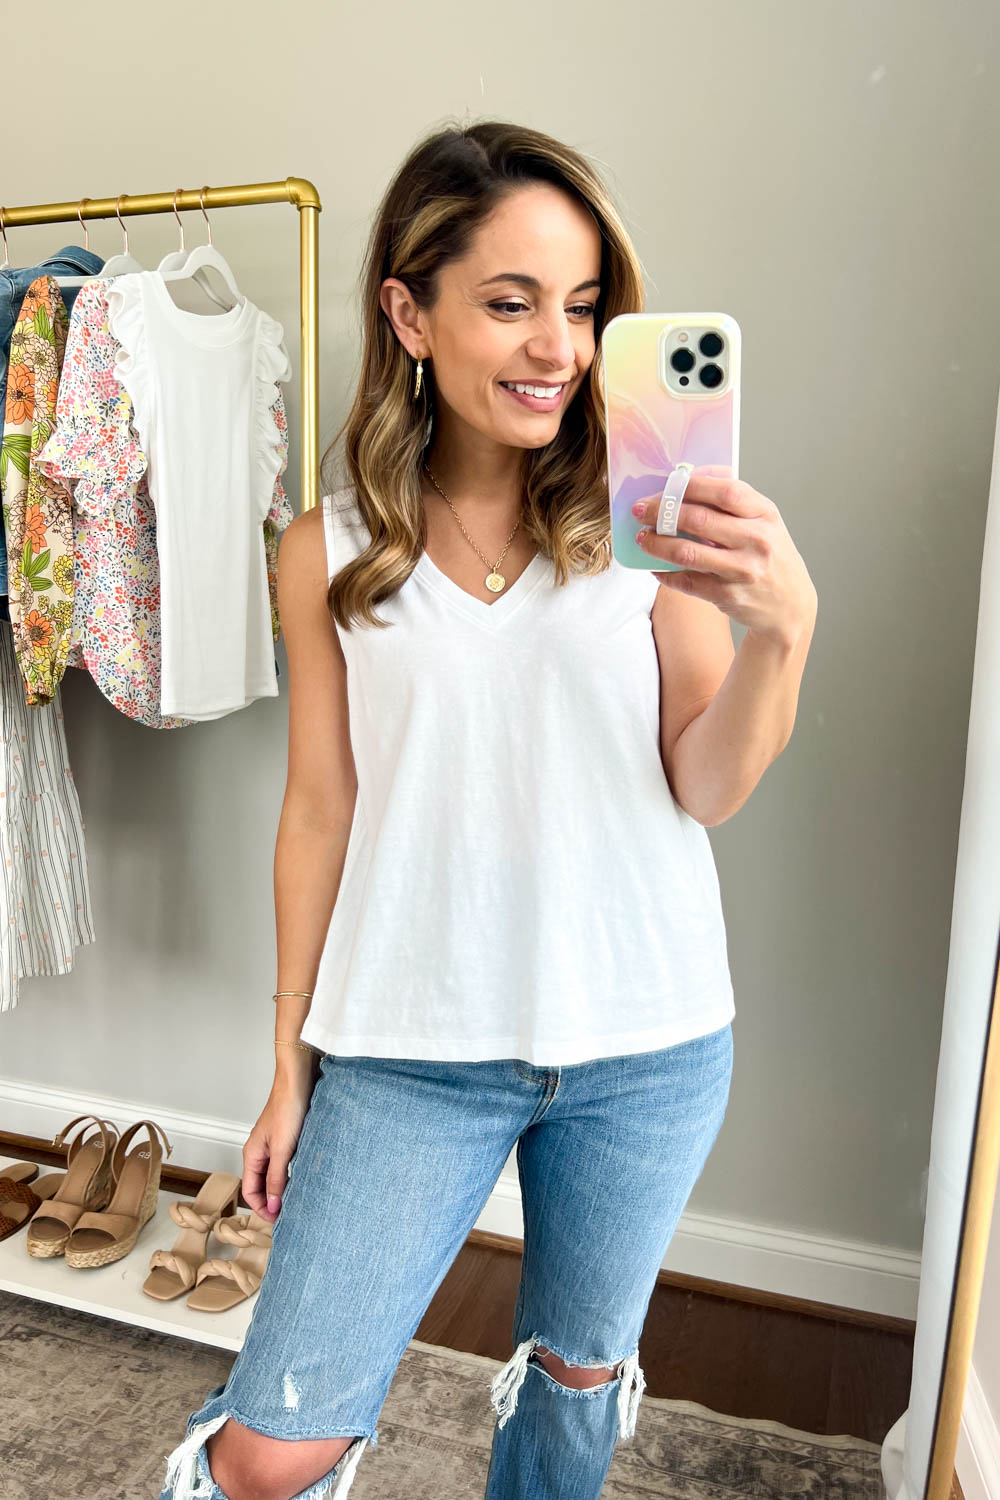 Old Navy EveryWear T-Shirts | Petite Friendly t shirts | petite t shirt review via pumps and push-ups blog | spring outfits 